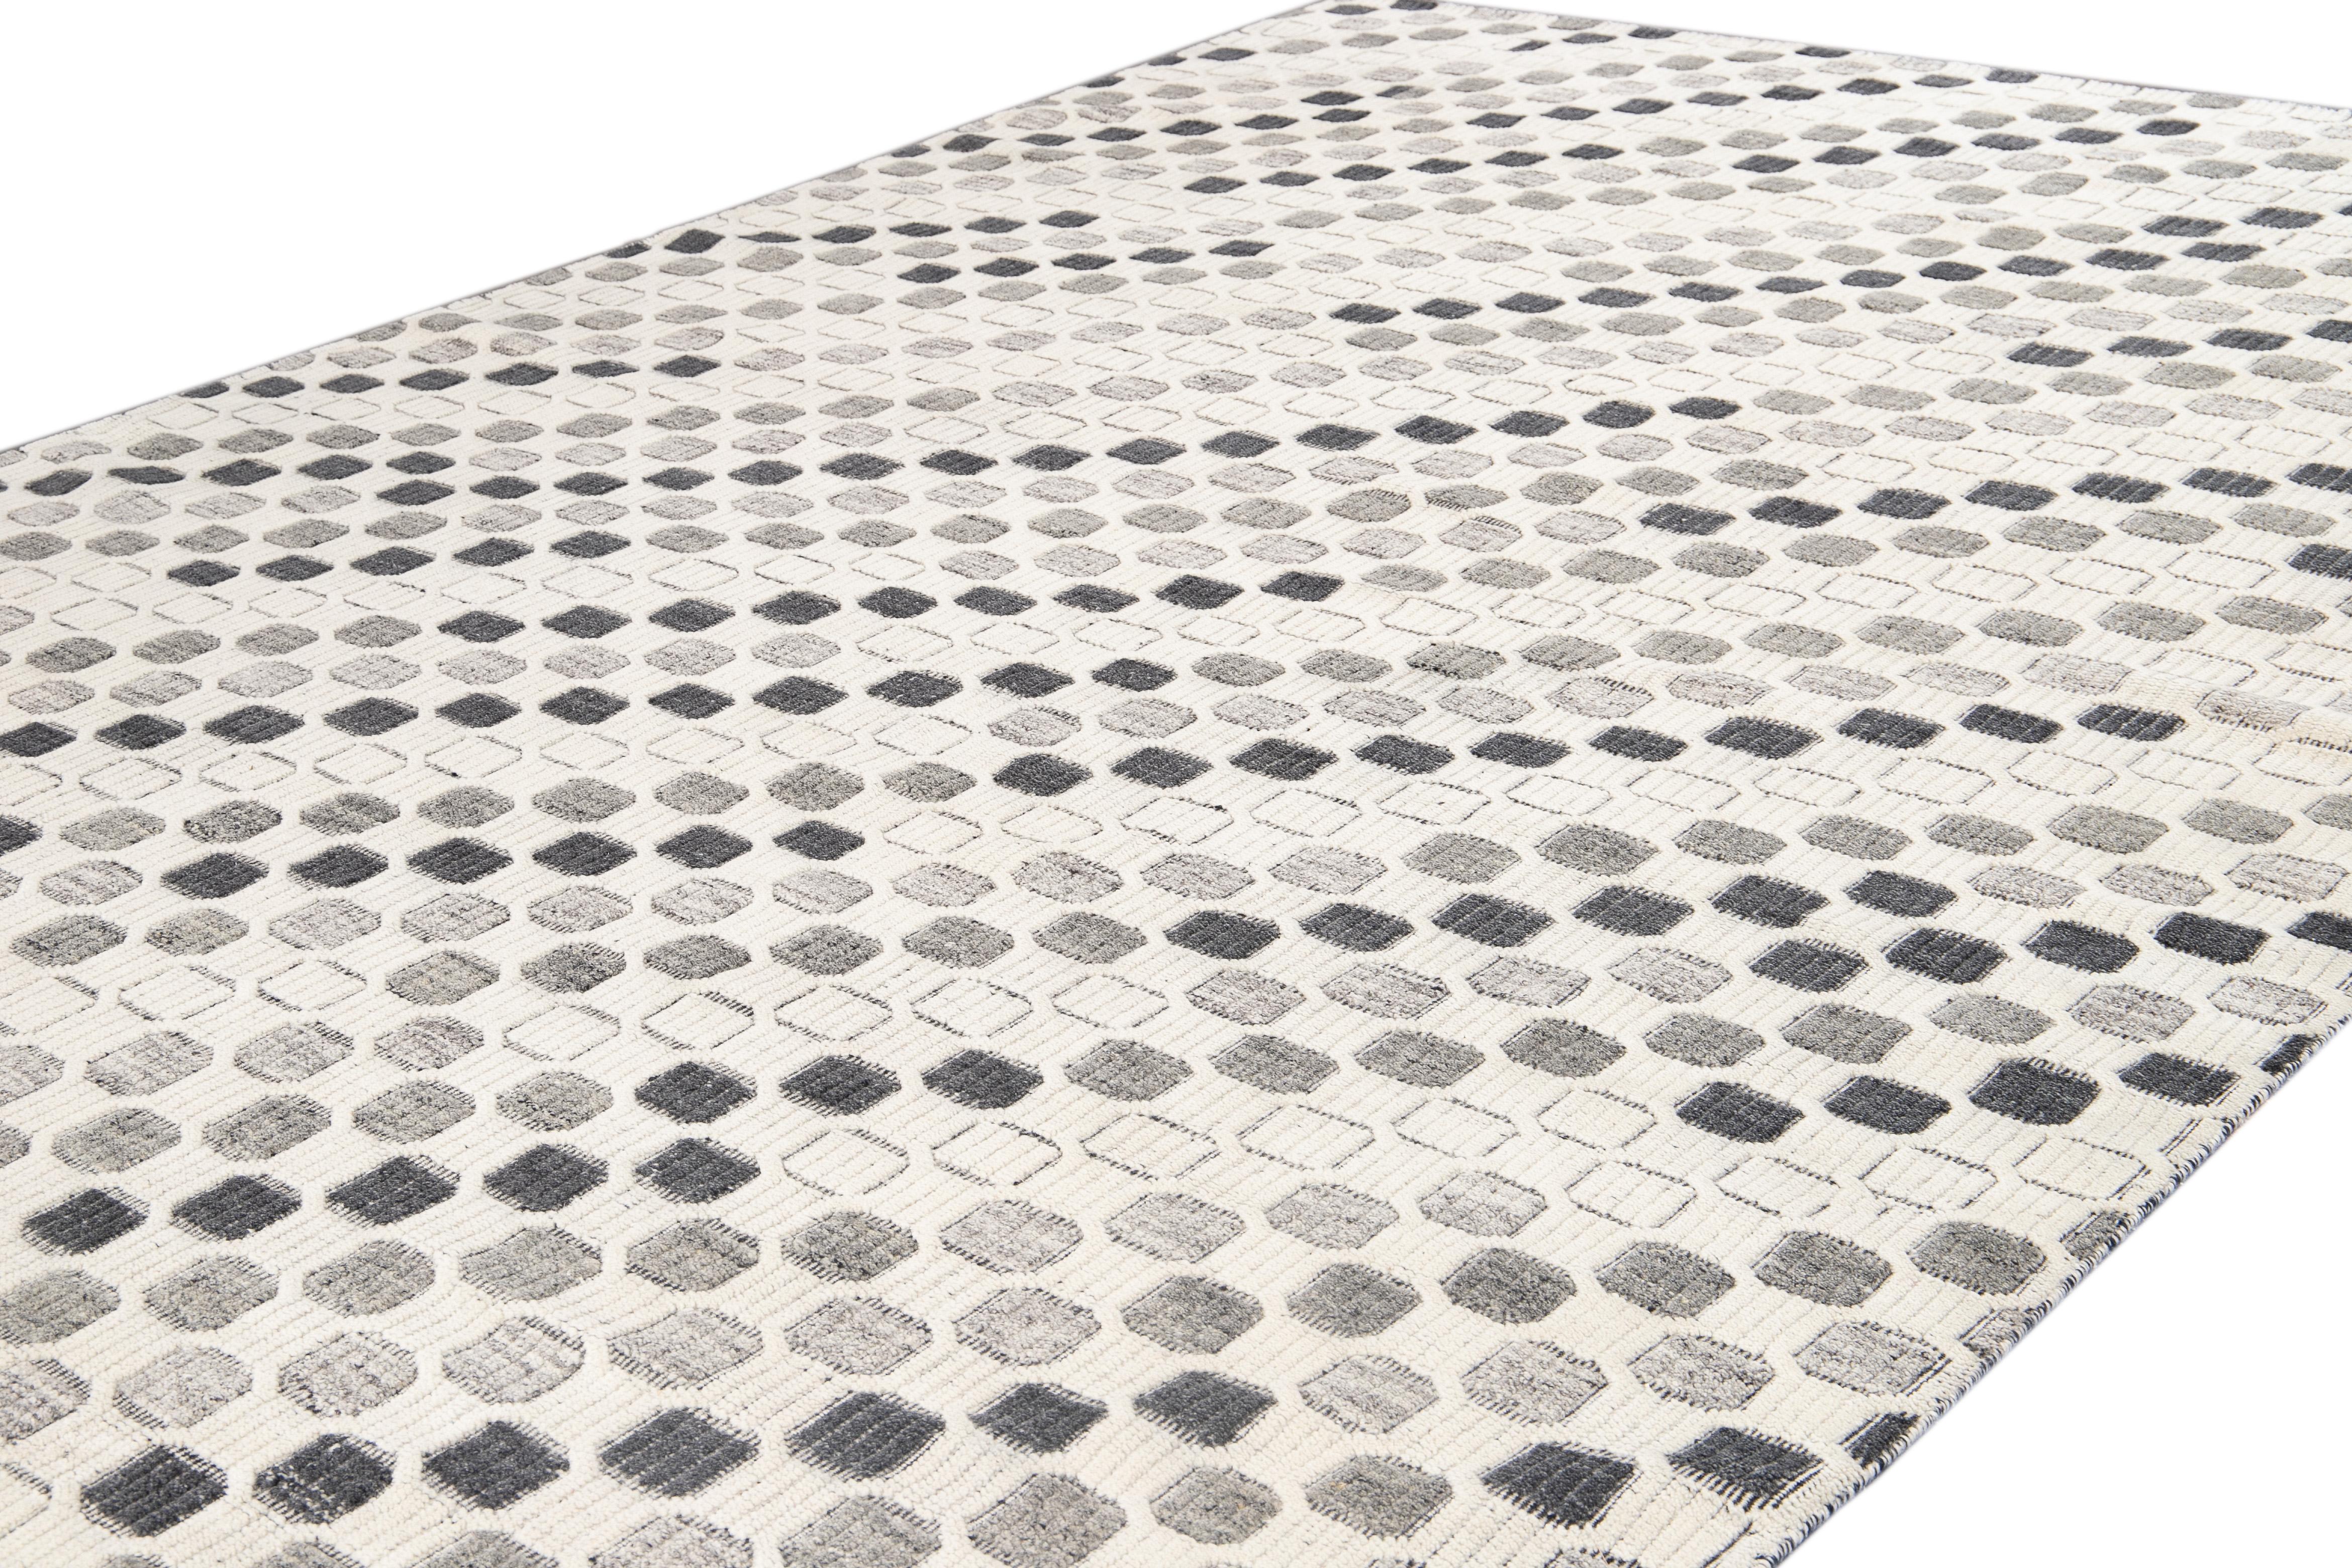 Beautiful modern high-low textured Indian hand-knotted wool rug with an ivory color field. This piece has an all-over geometric pattern design in gray and black accents.

This rug measures 10' 0